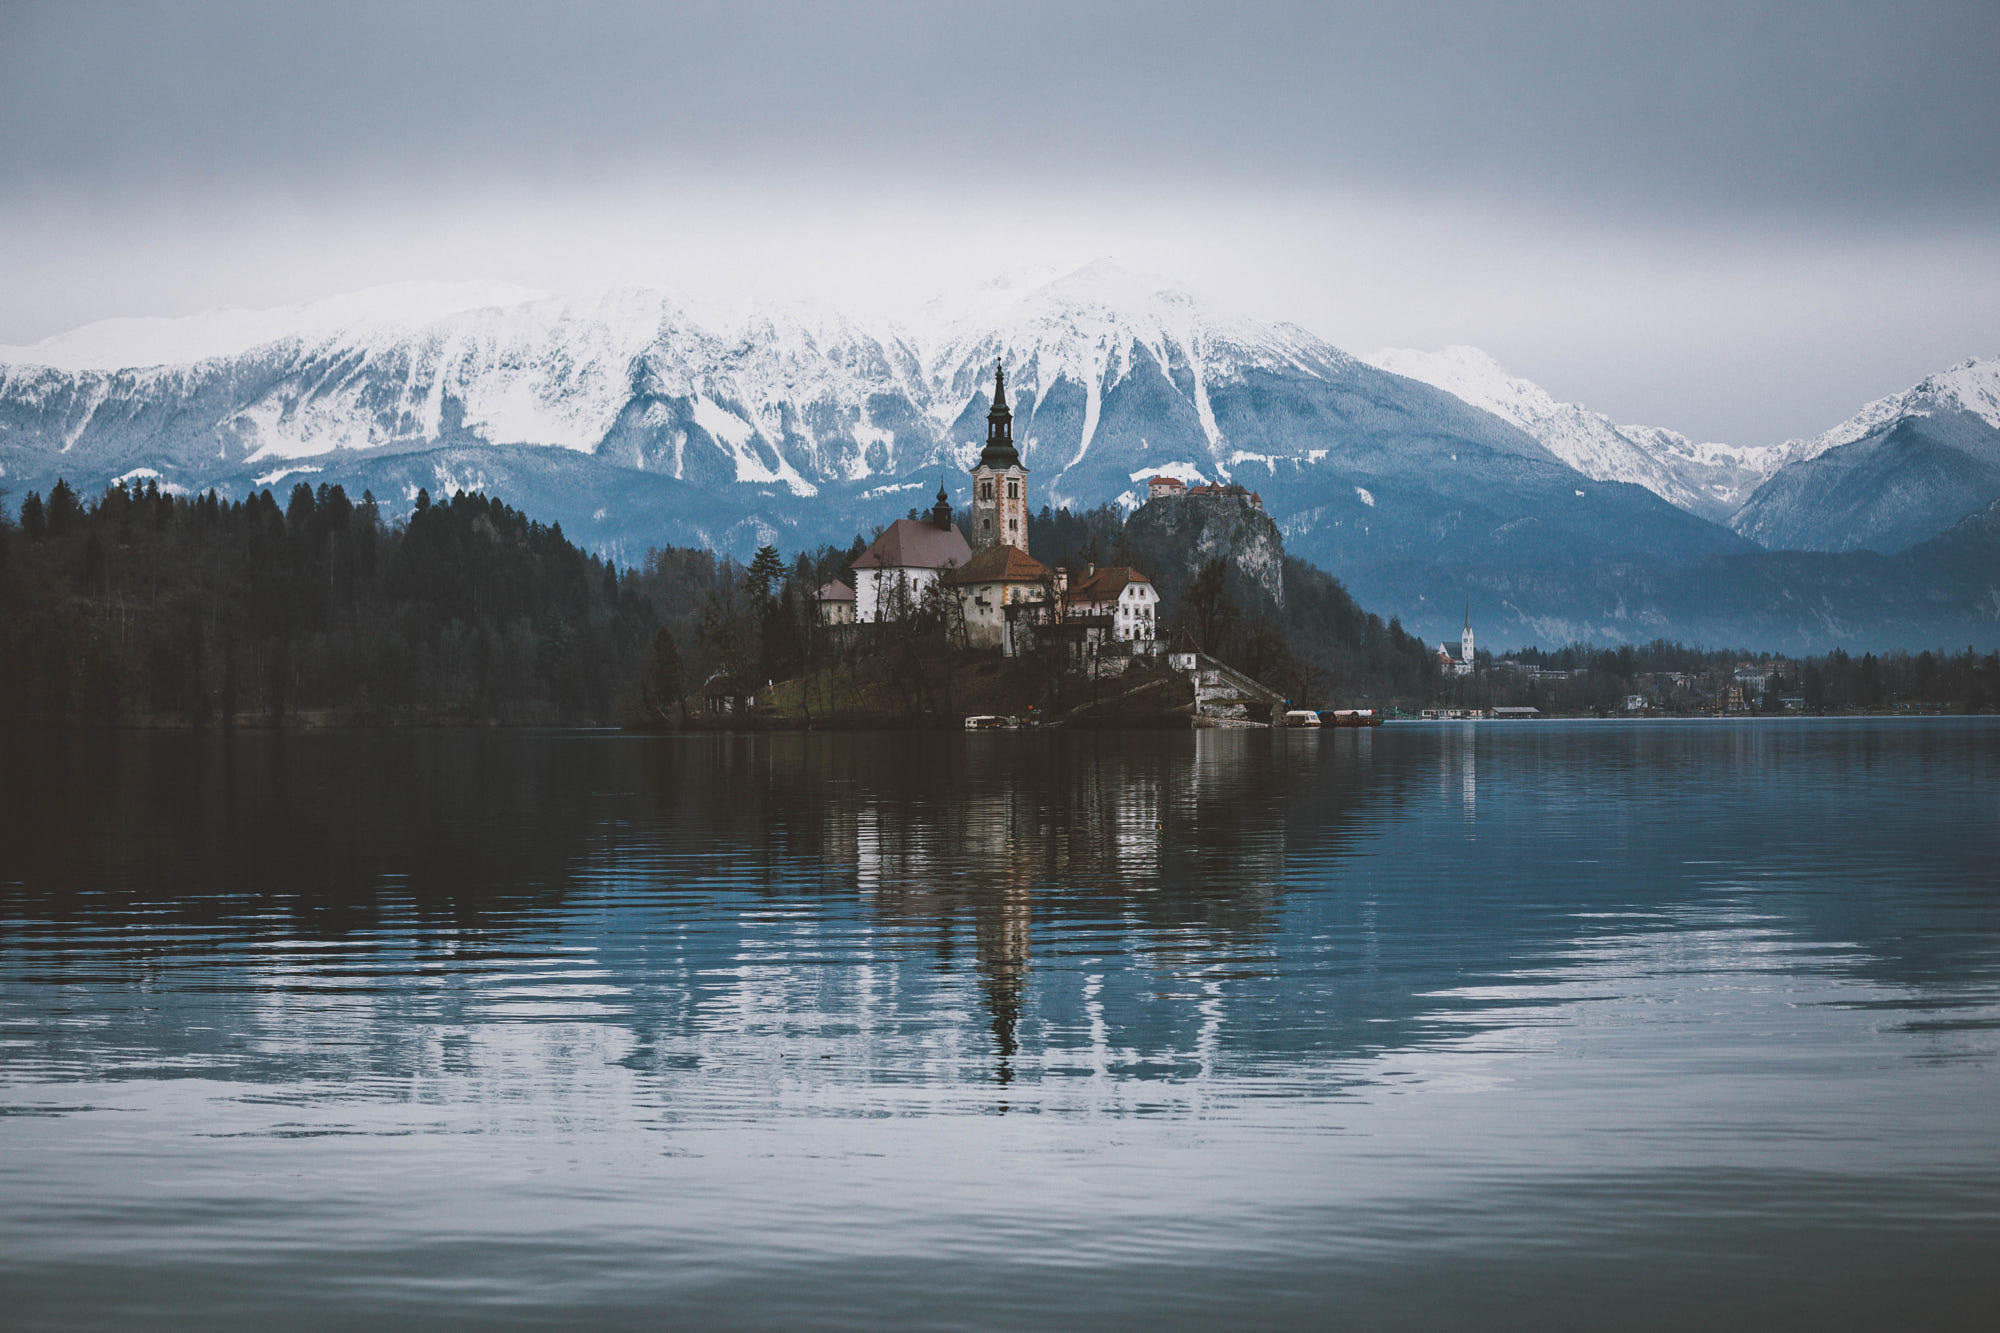 Lake bled on a calm winter day.